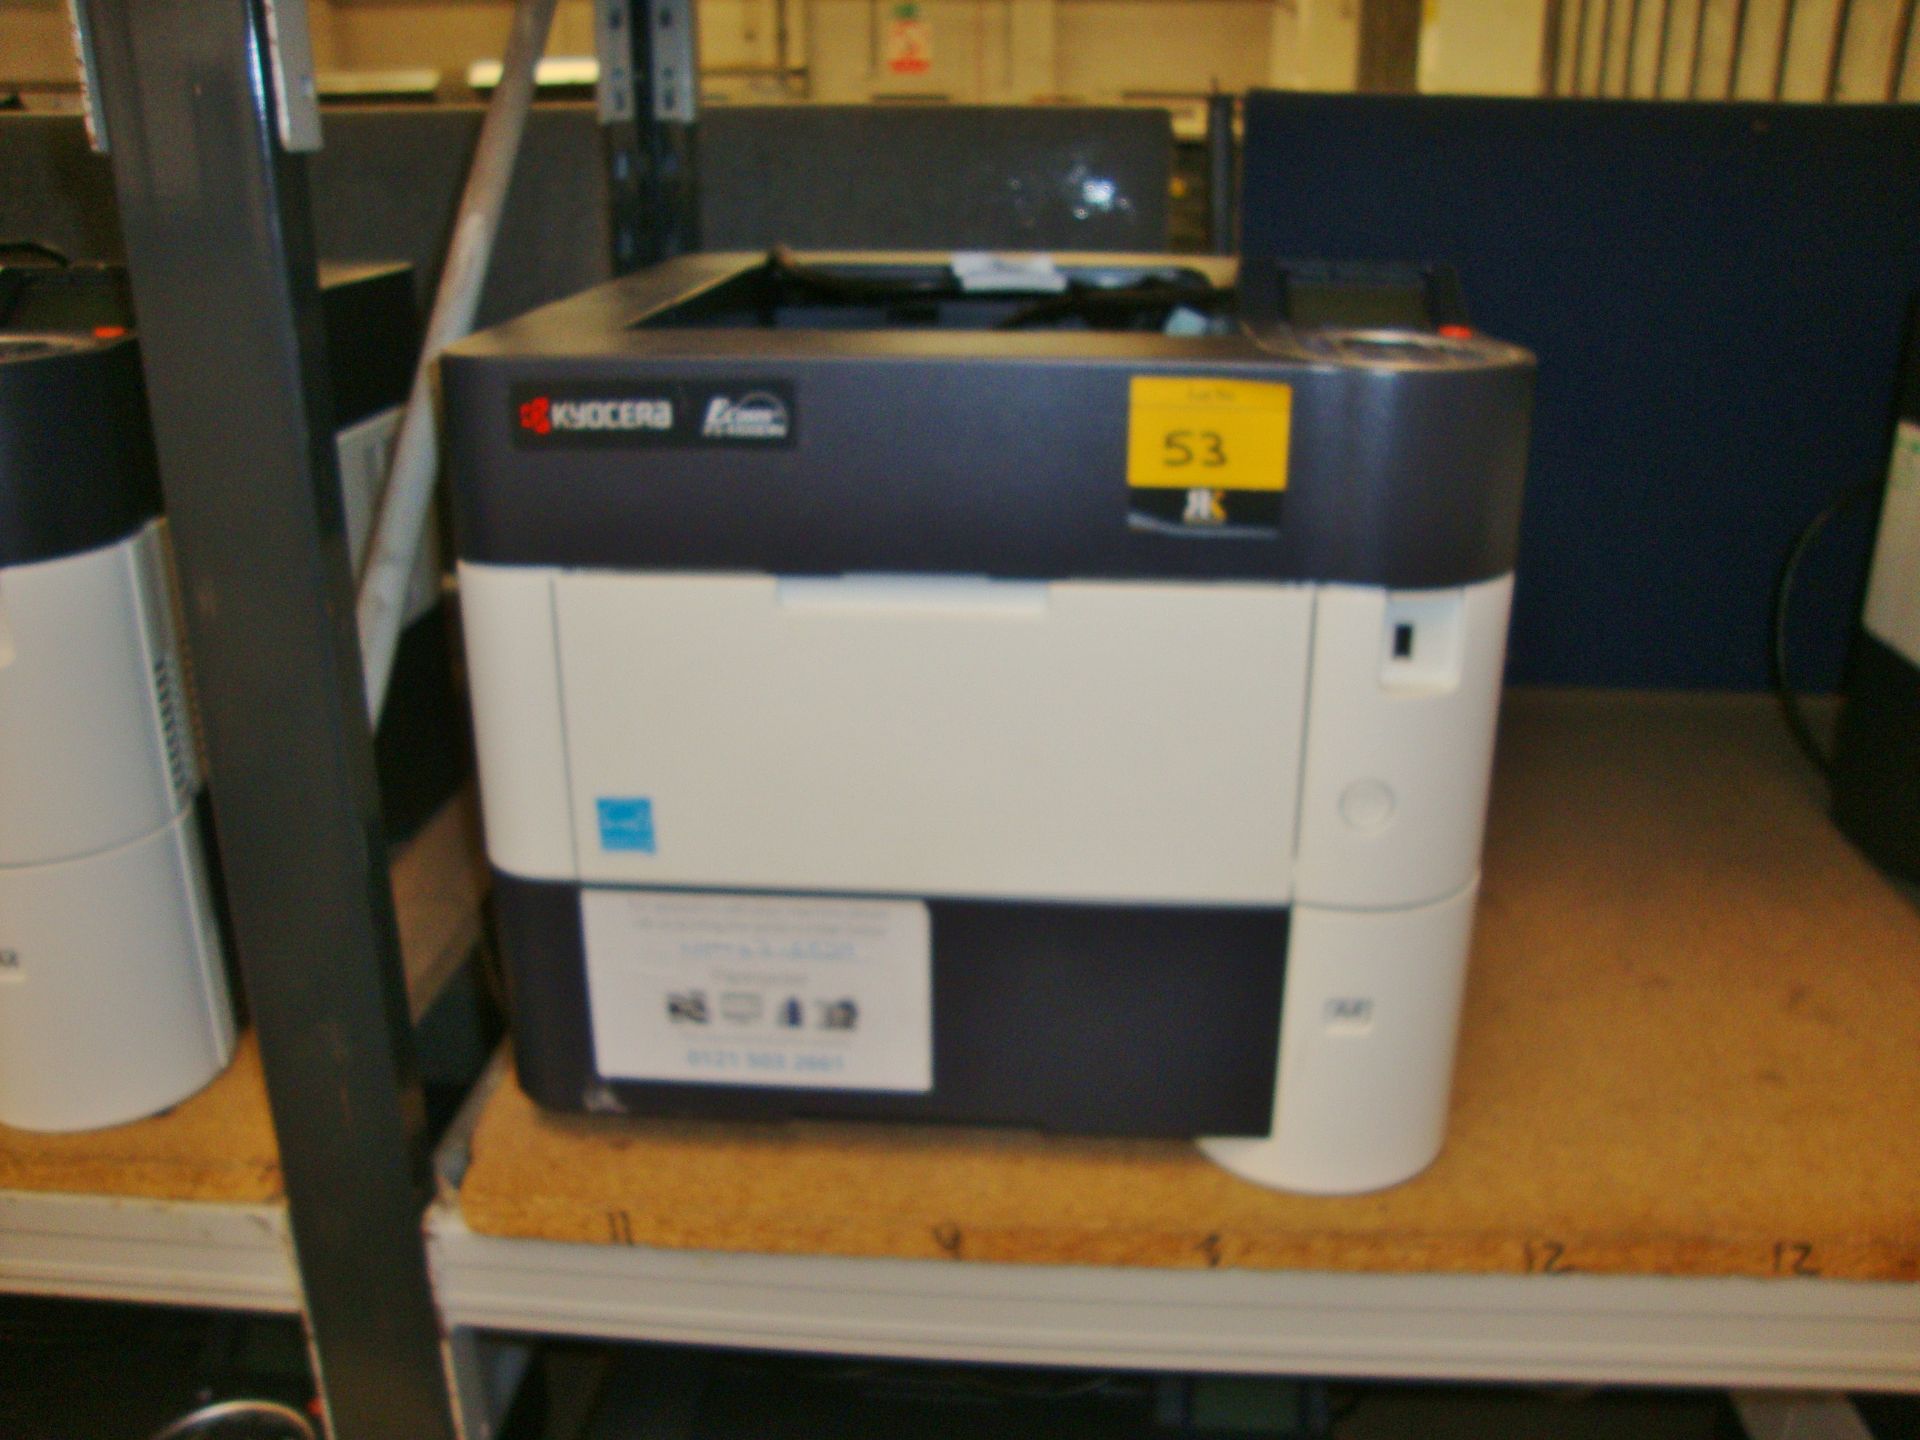 Kyocera model FS-4100DN A4 monolaser printer with up to 1,200 DPI resolution, 45 pages per minute, - Image 2 of 3